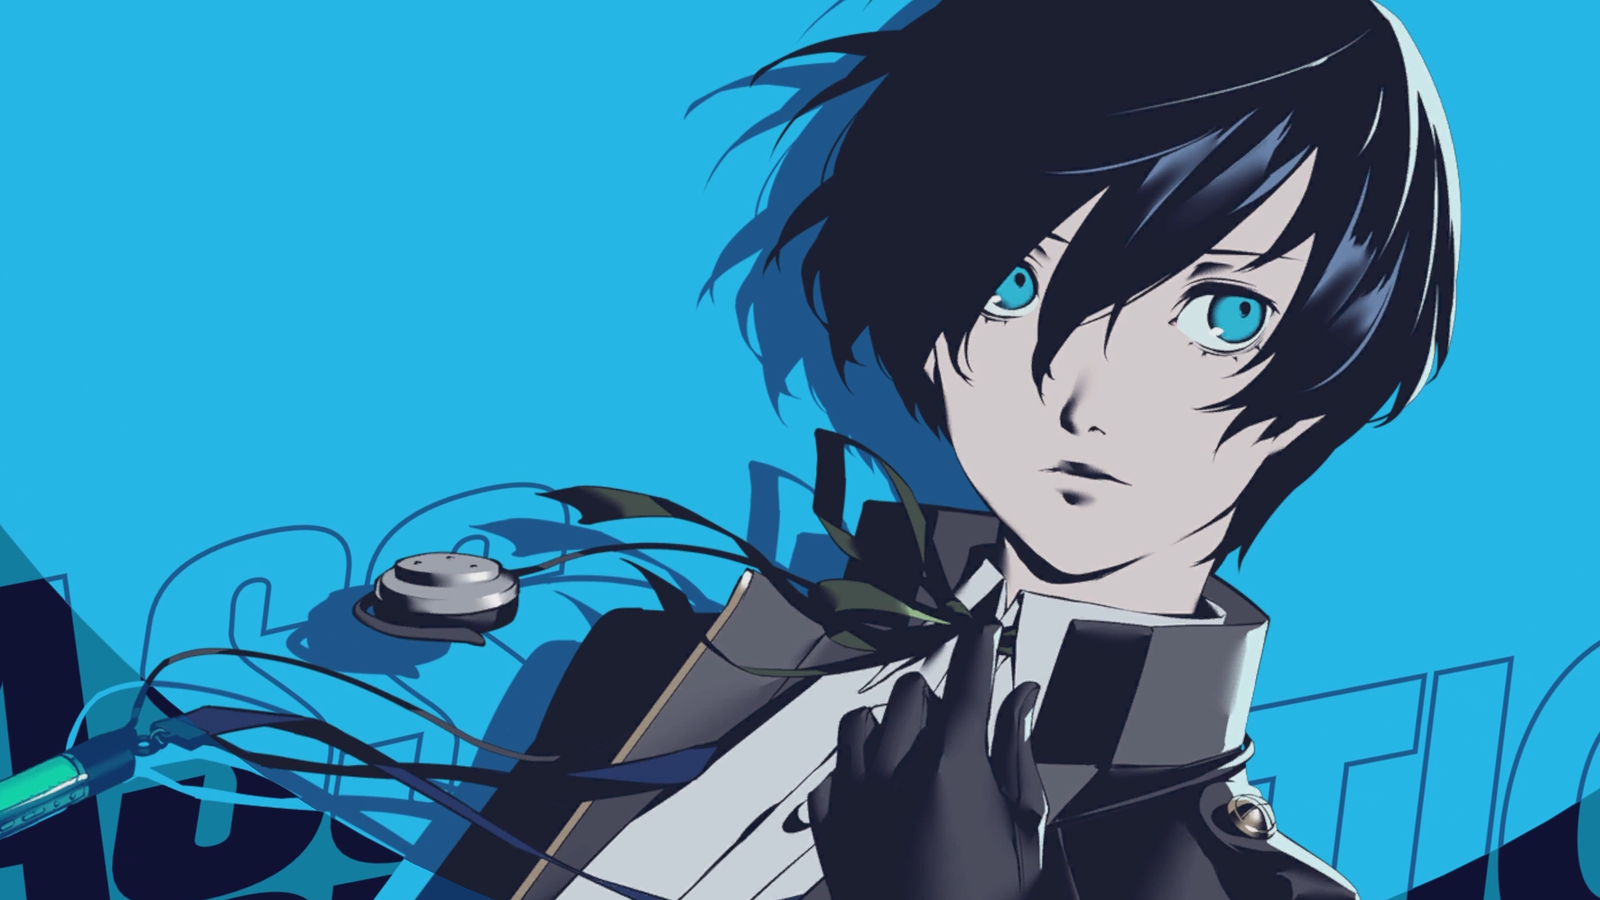 Persona 3 Reload builds on fine foundations, but may fall just